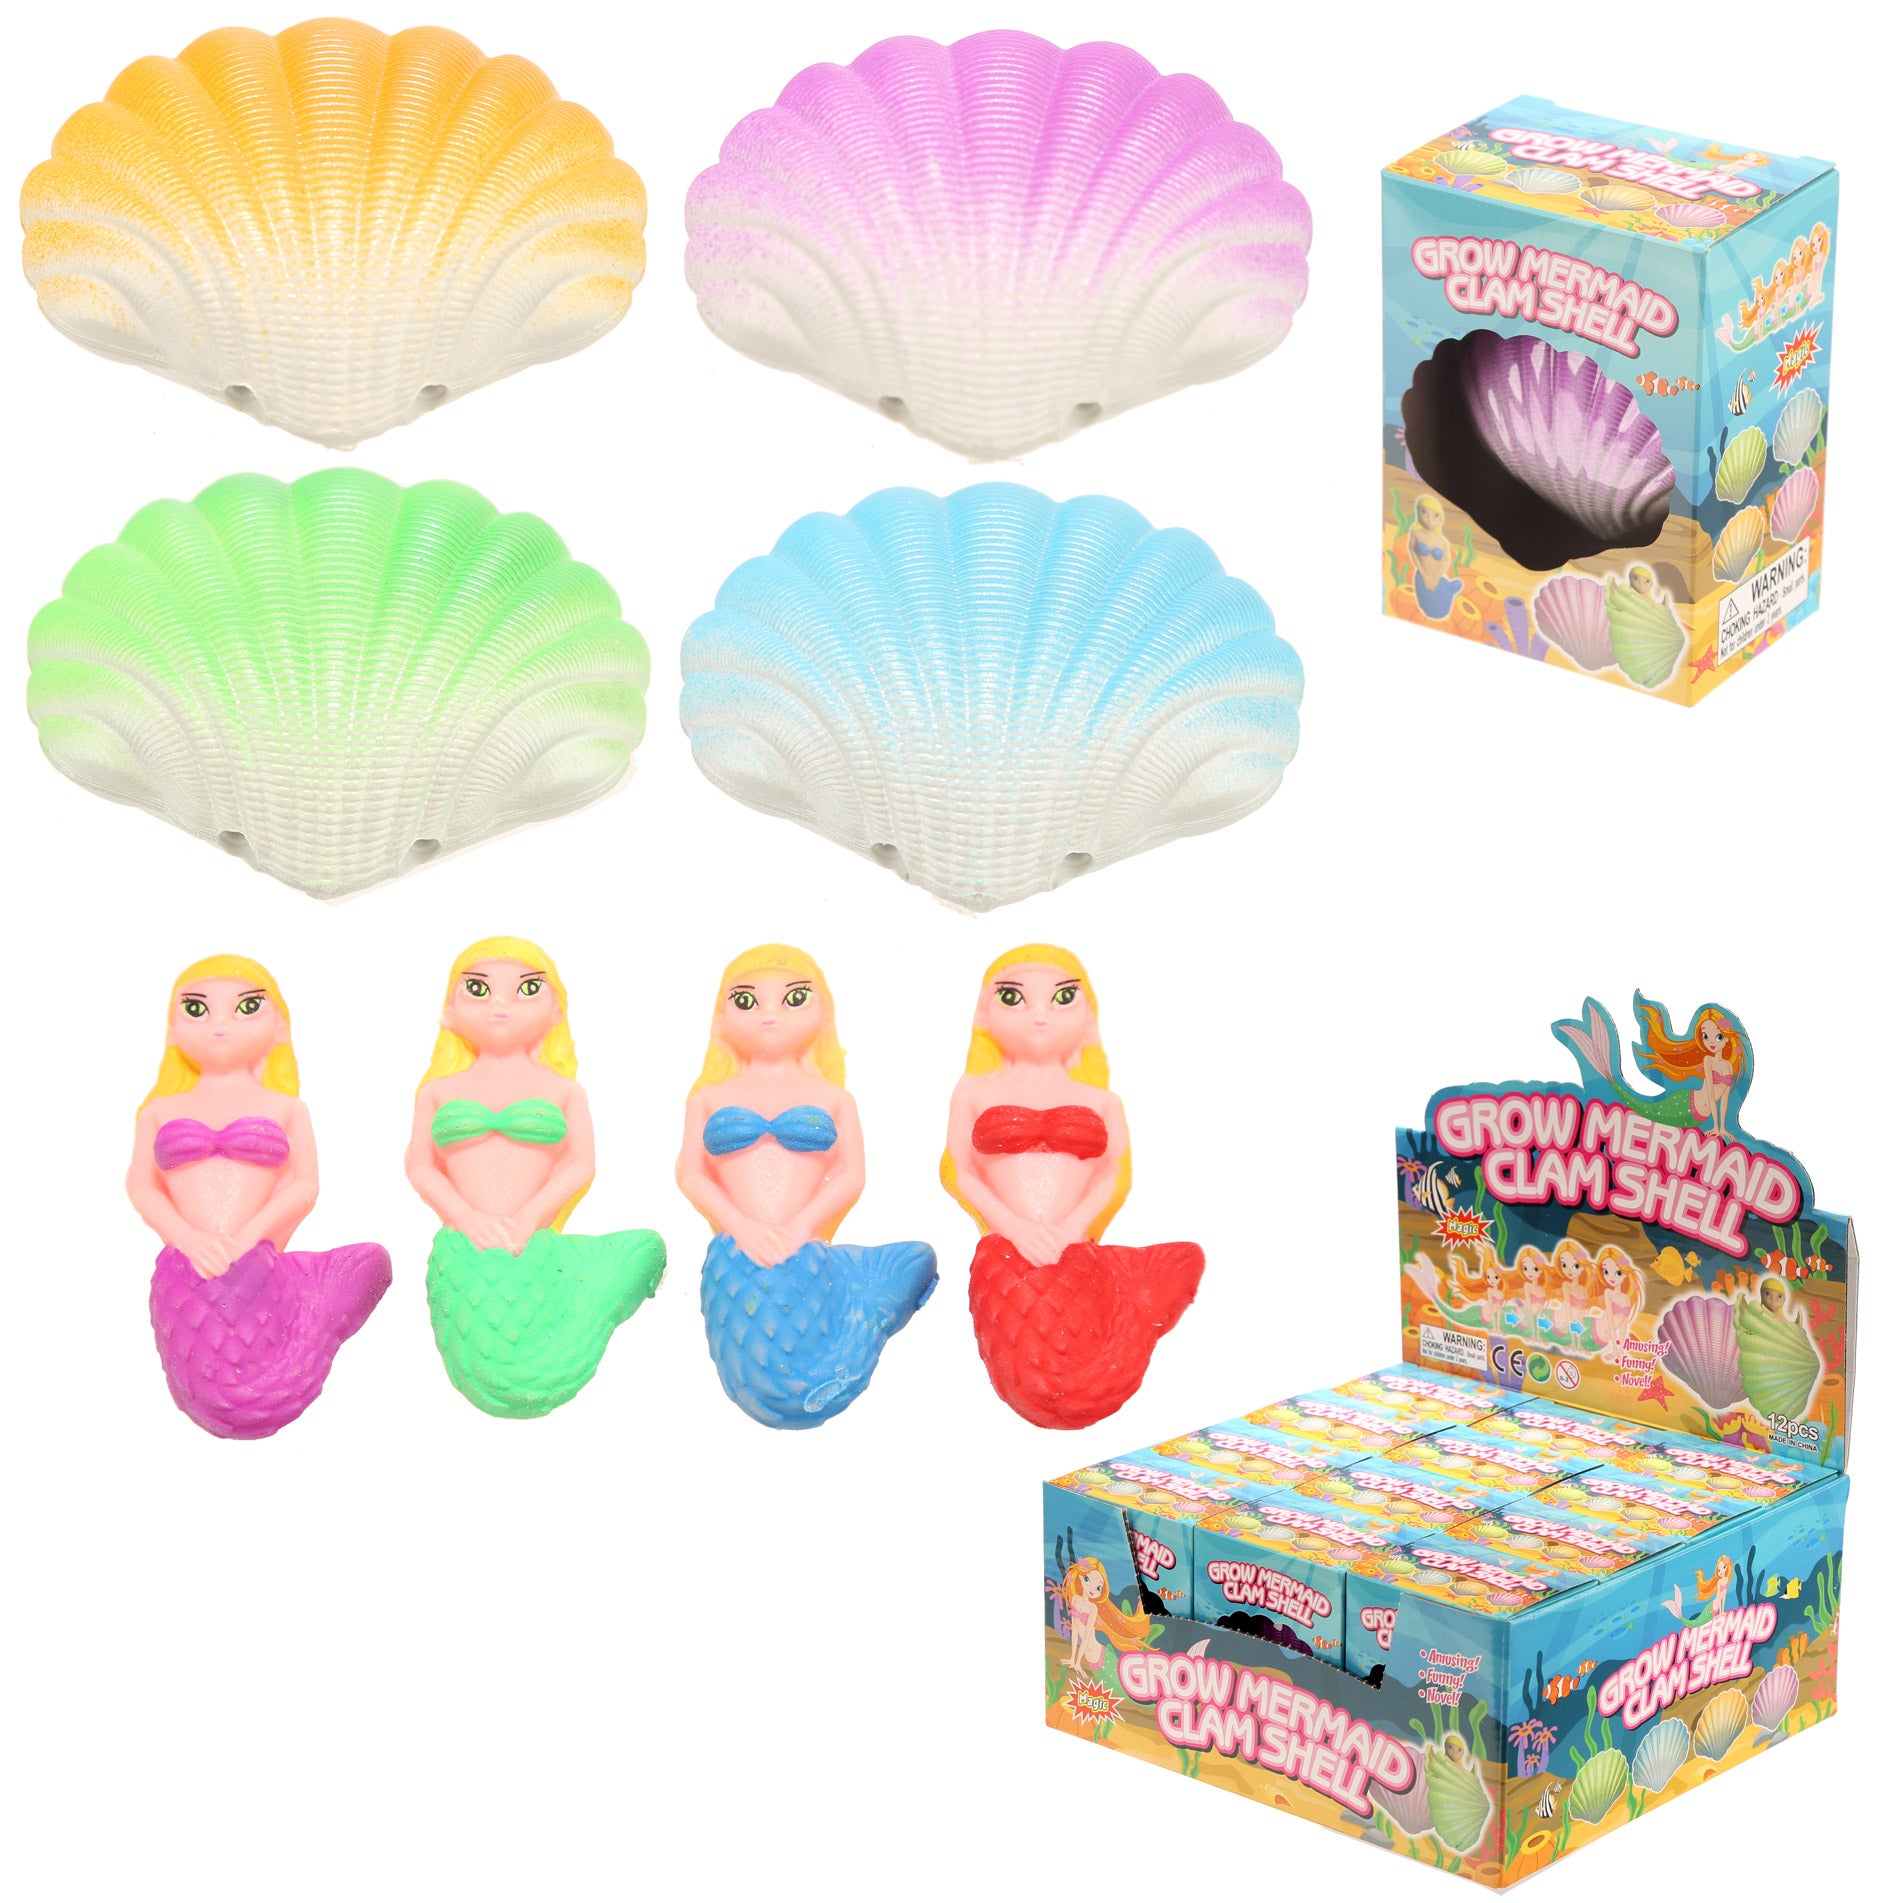 View Mermaid Hatching Clam Shell information